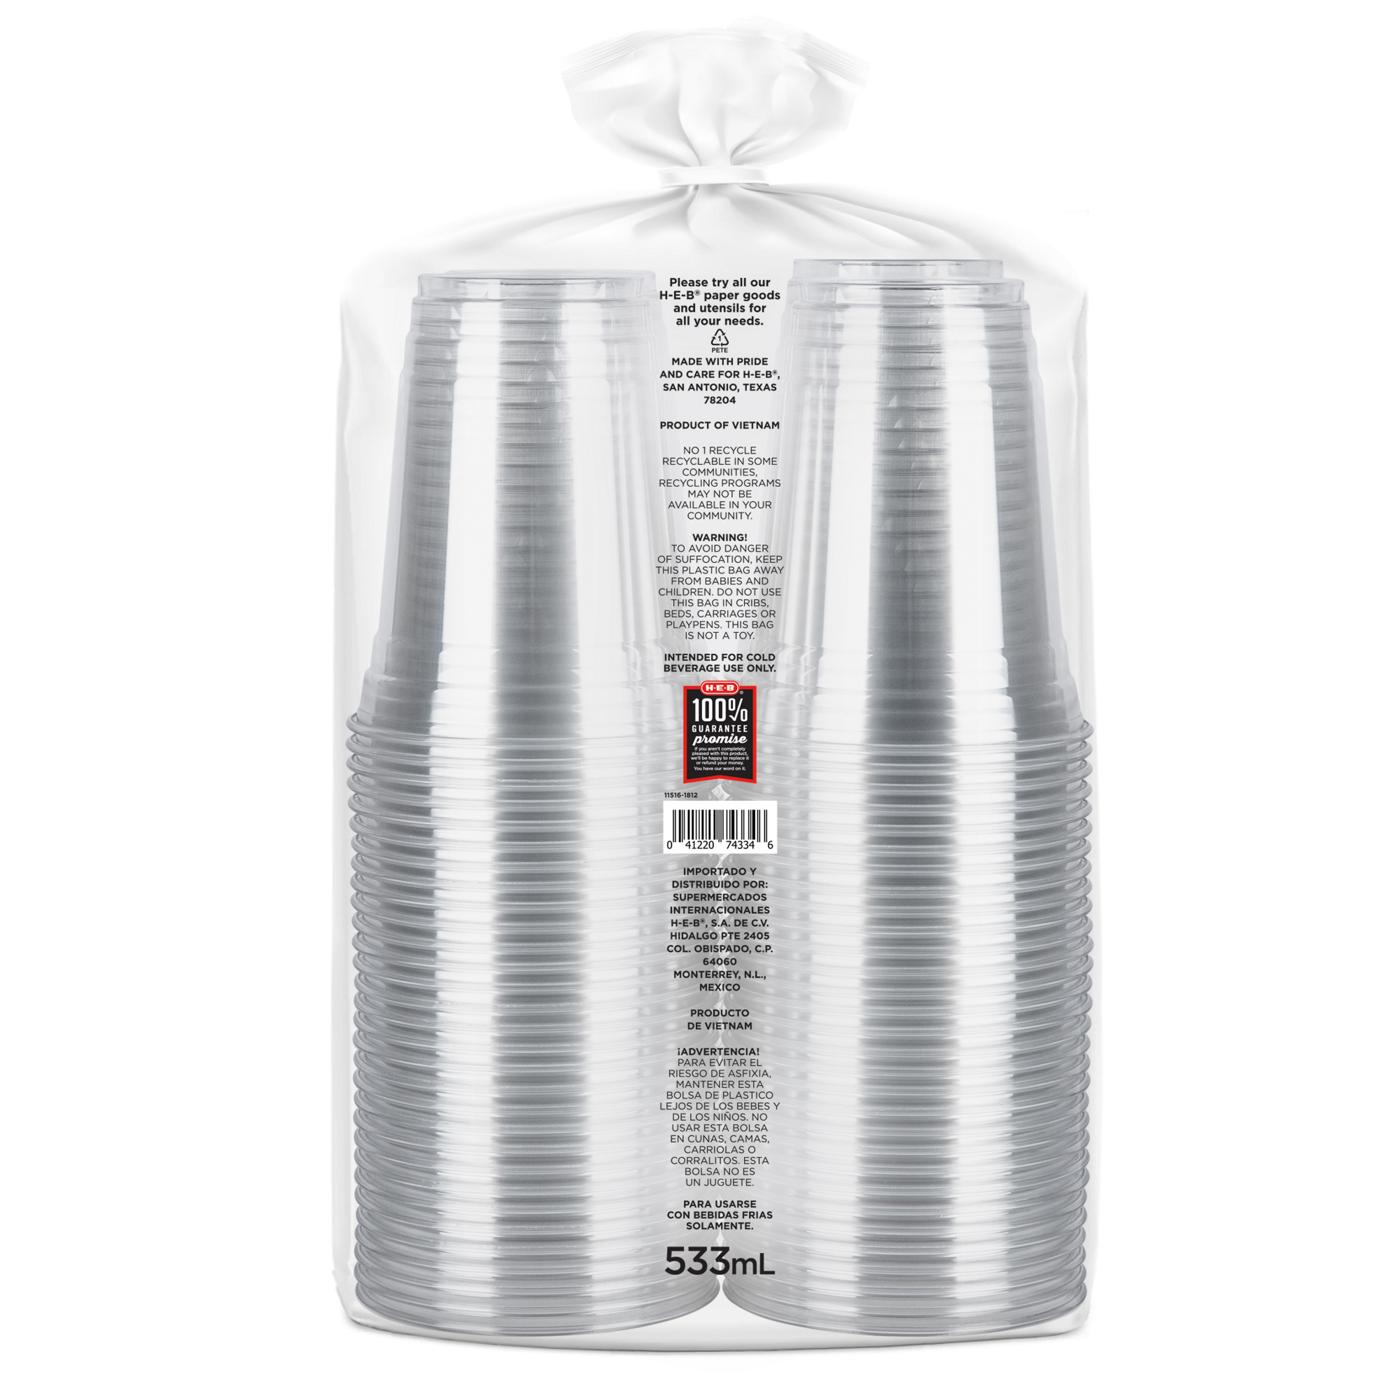 H-E-B 12 oz Insulated Cups with Snap-On Lids